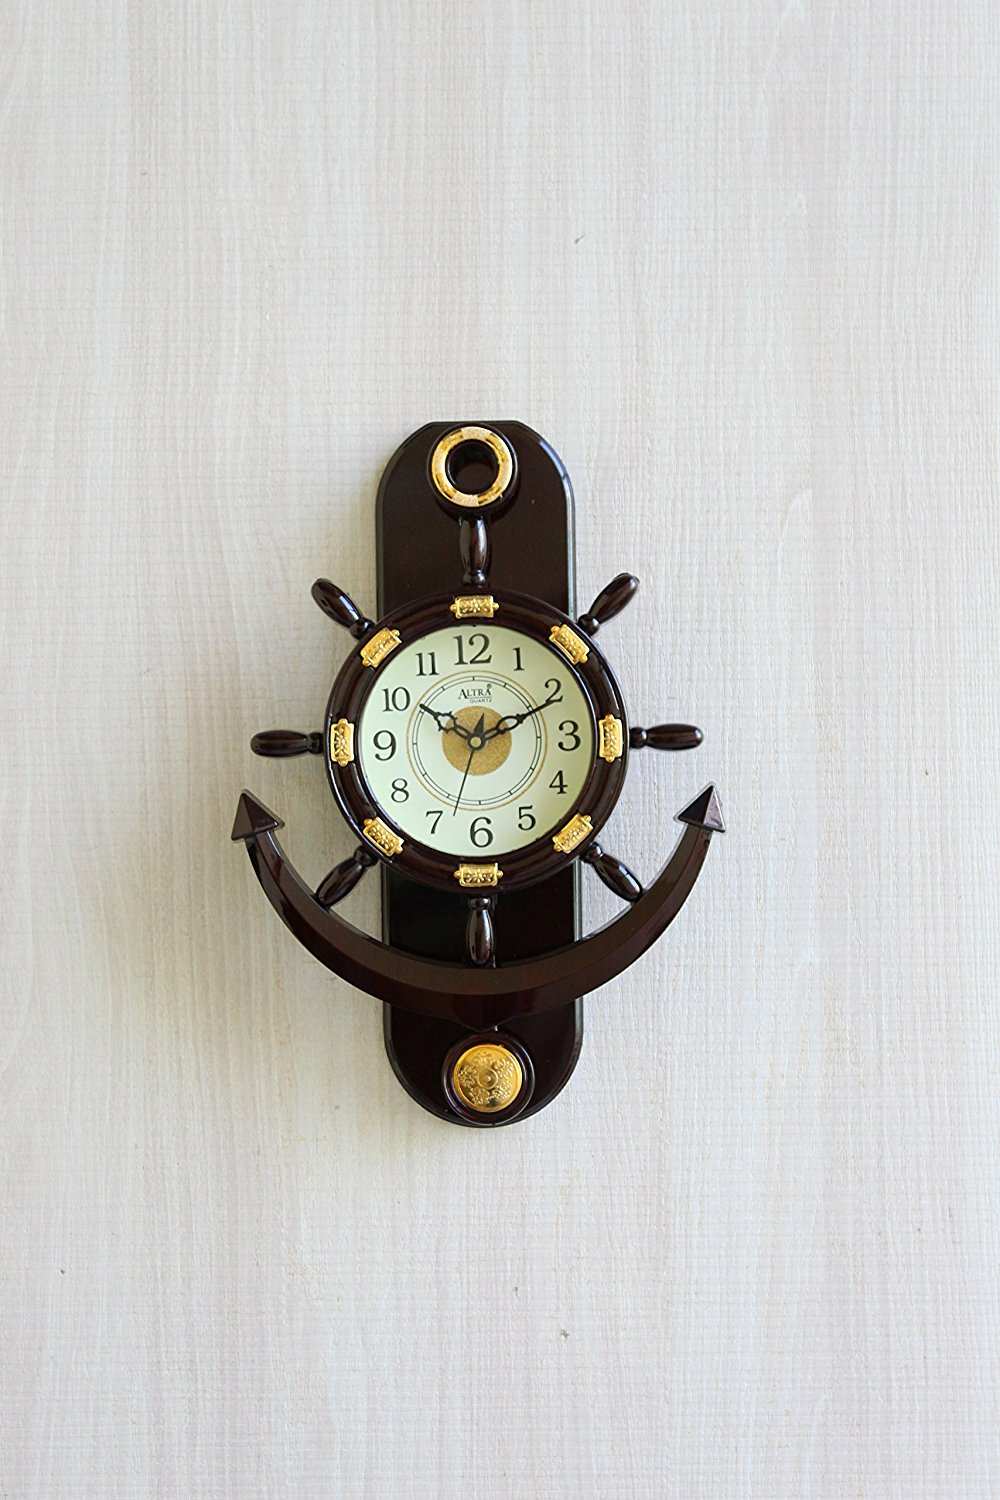 FunkyTradition Decorative Retro Anchor Ship Steering Shape Plastic Pendulum Wall Clock for Home Office Decor and Gifts 40 CM Tall - FunkyTradition